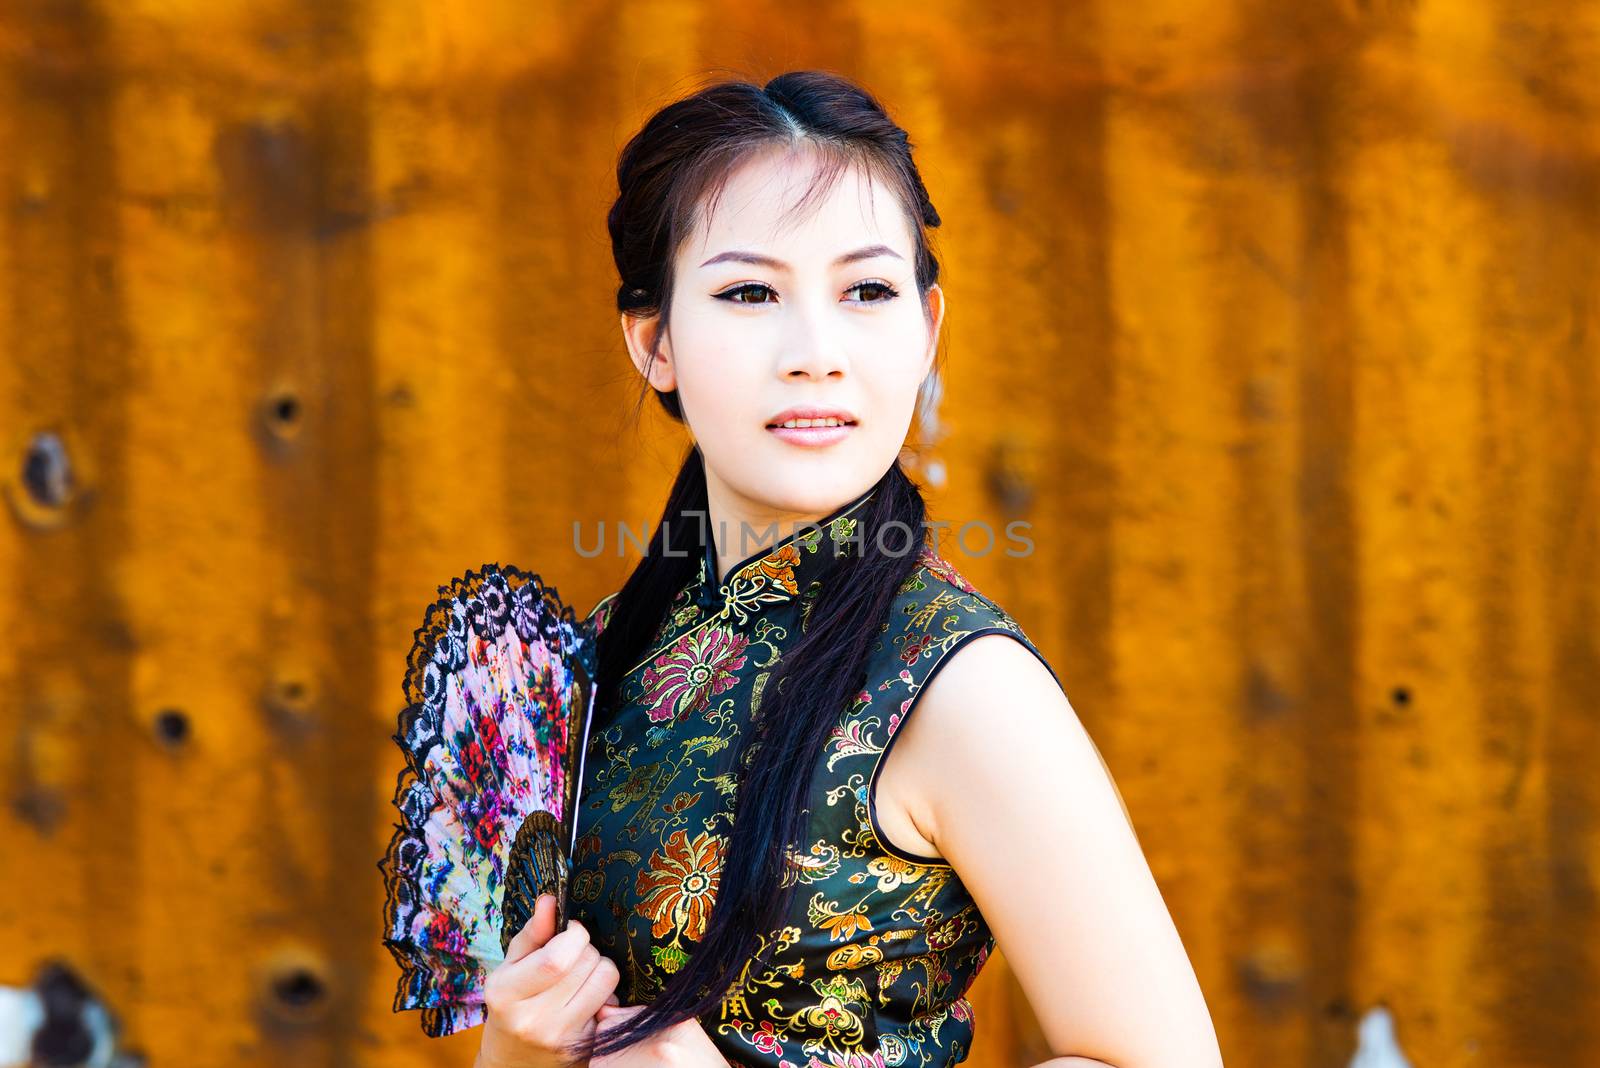 Chinese girl in traditional Chinese cheongsam blessing by Yuri2012